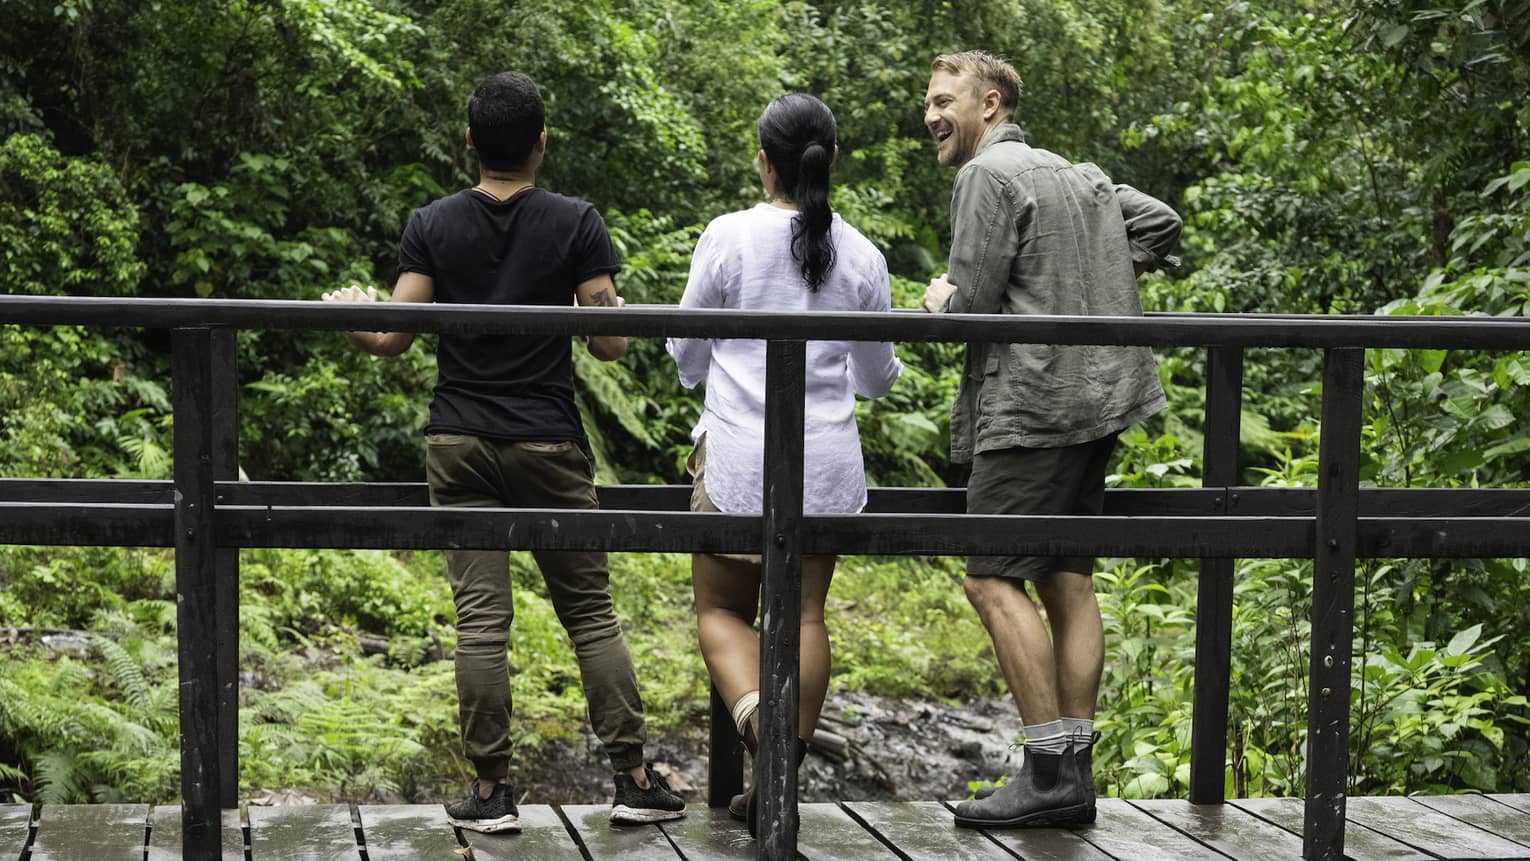 Three people stand on a wooden bridge that crosses over a small river in the middle of a forest